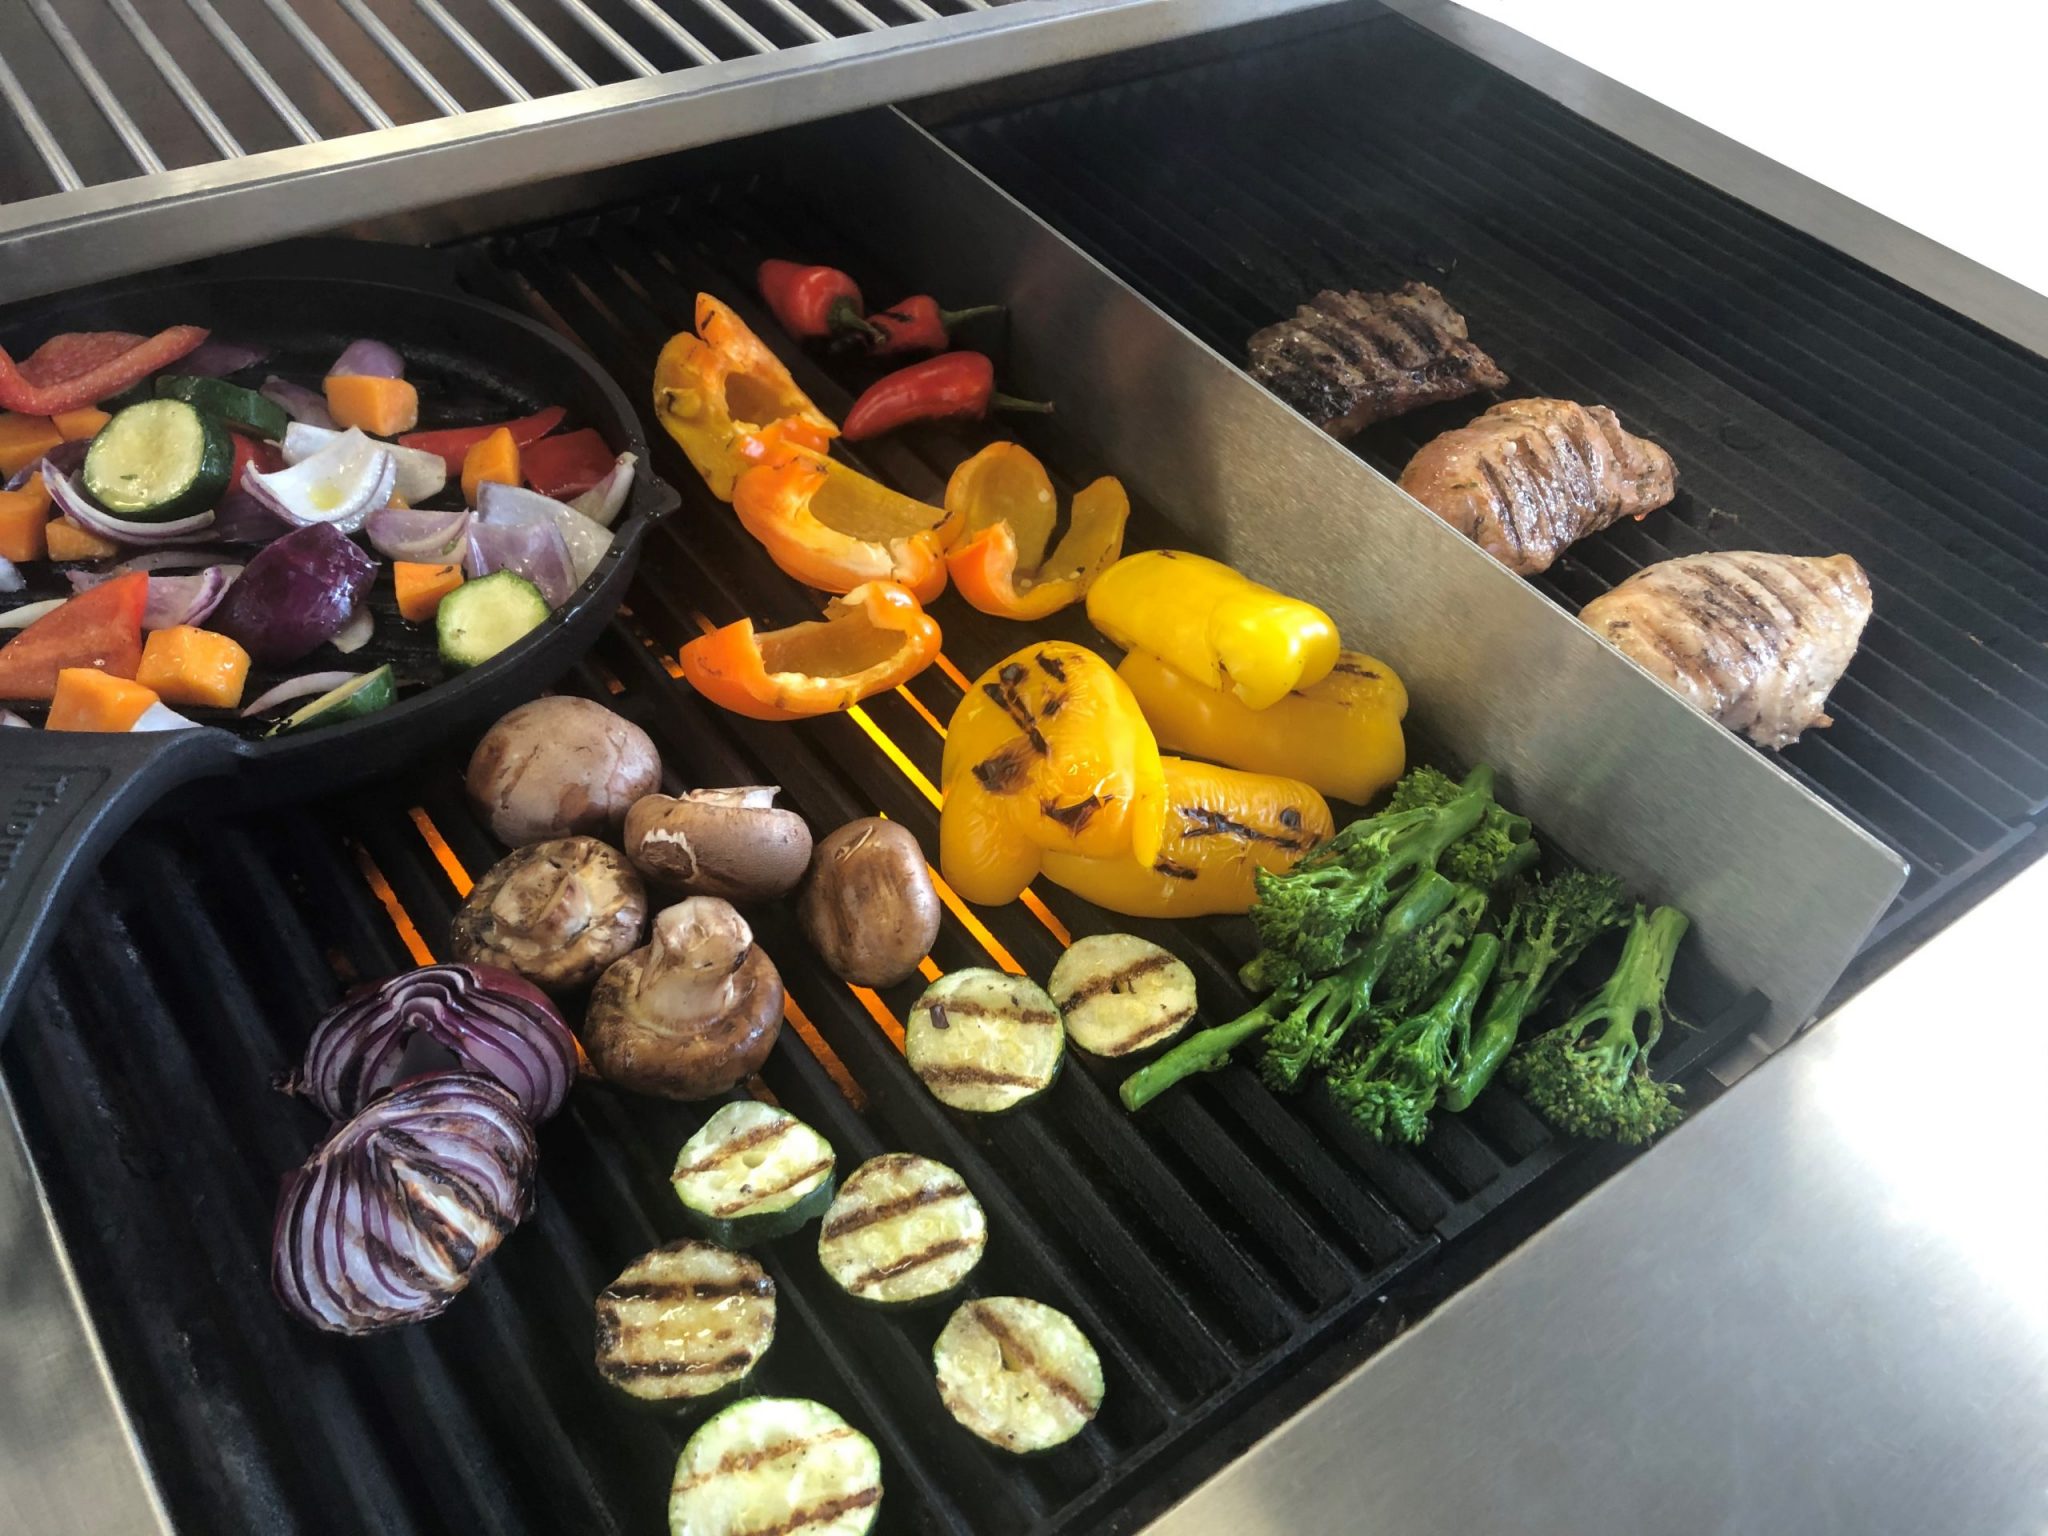 Synergy grill divider with vegetables and meat